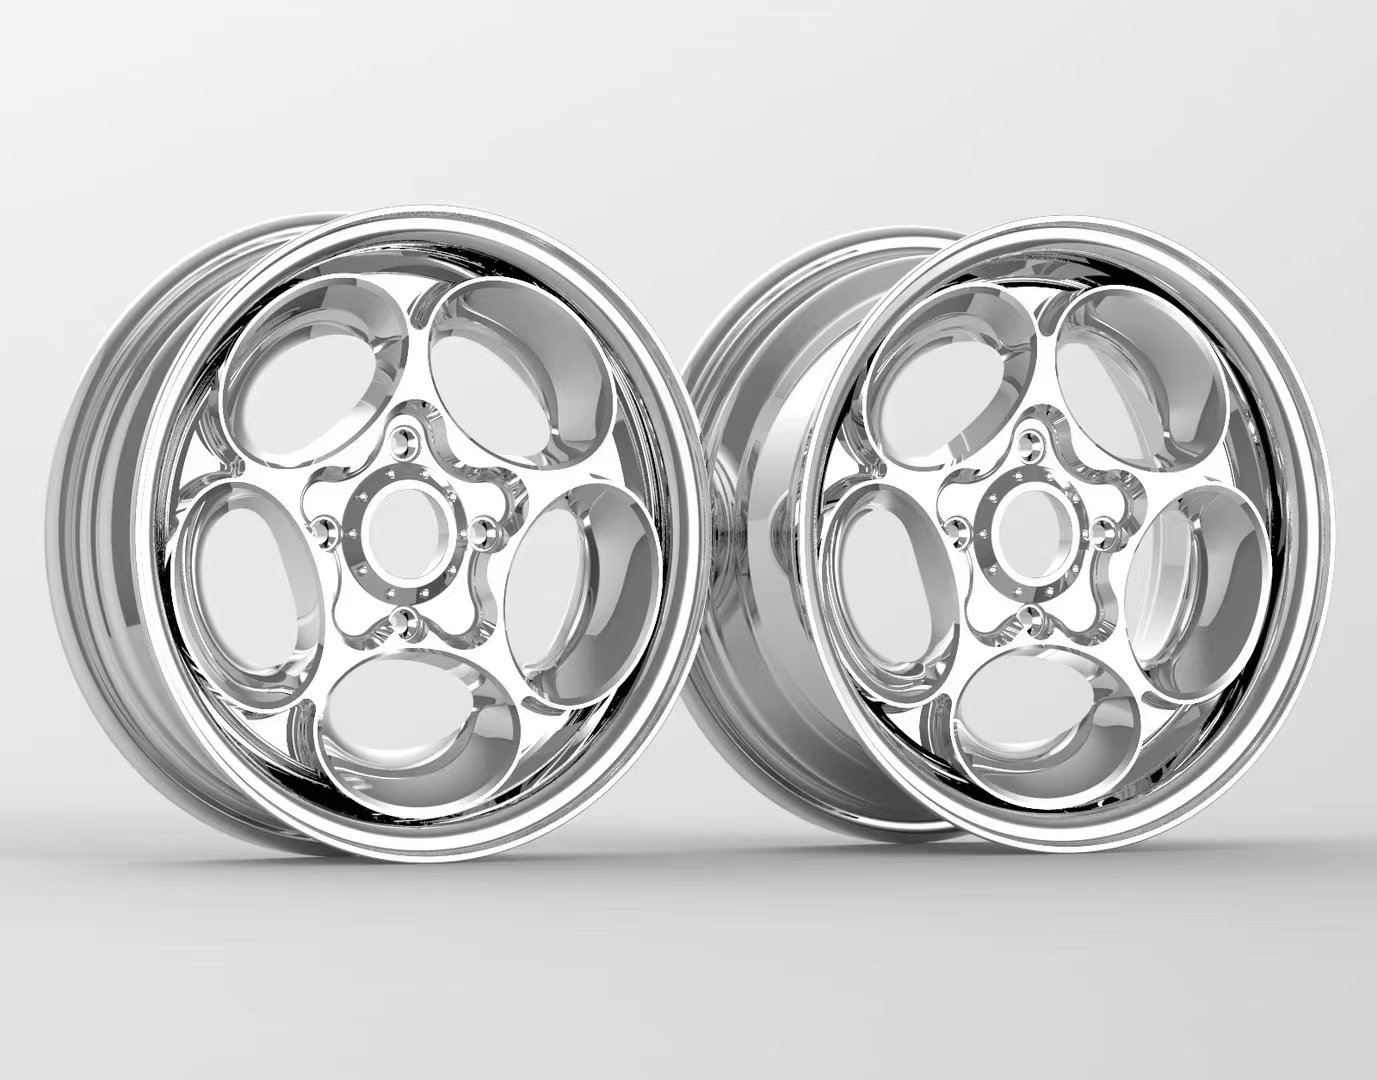 Super Cool Motorcycle 3-piece Forged Wheel 13x6J All Polished OZ replica rim